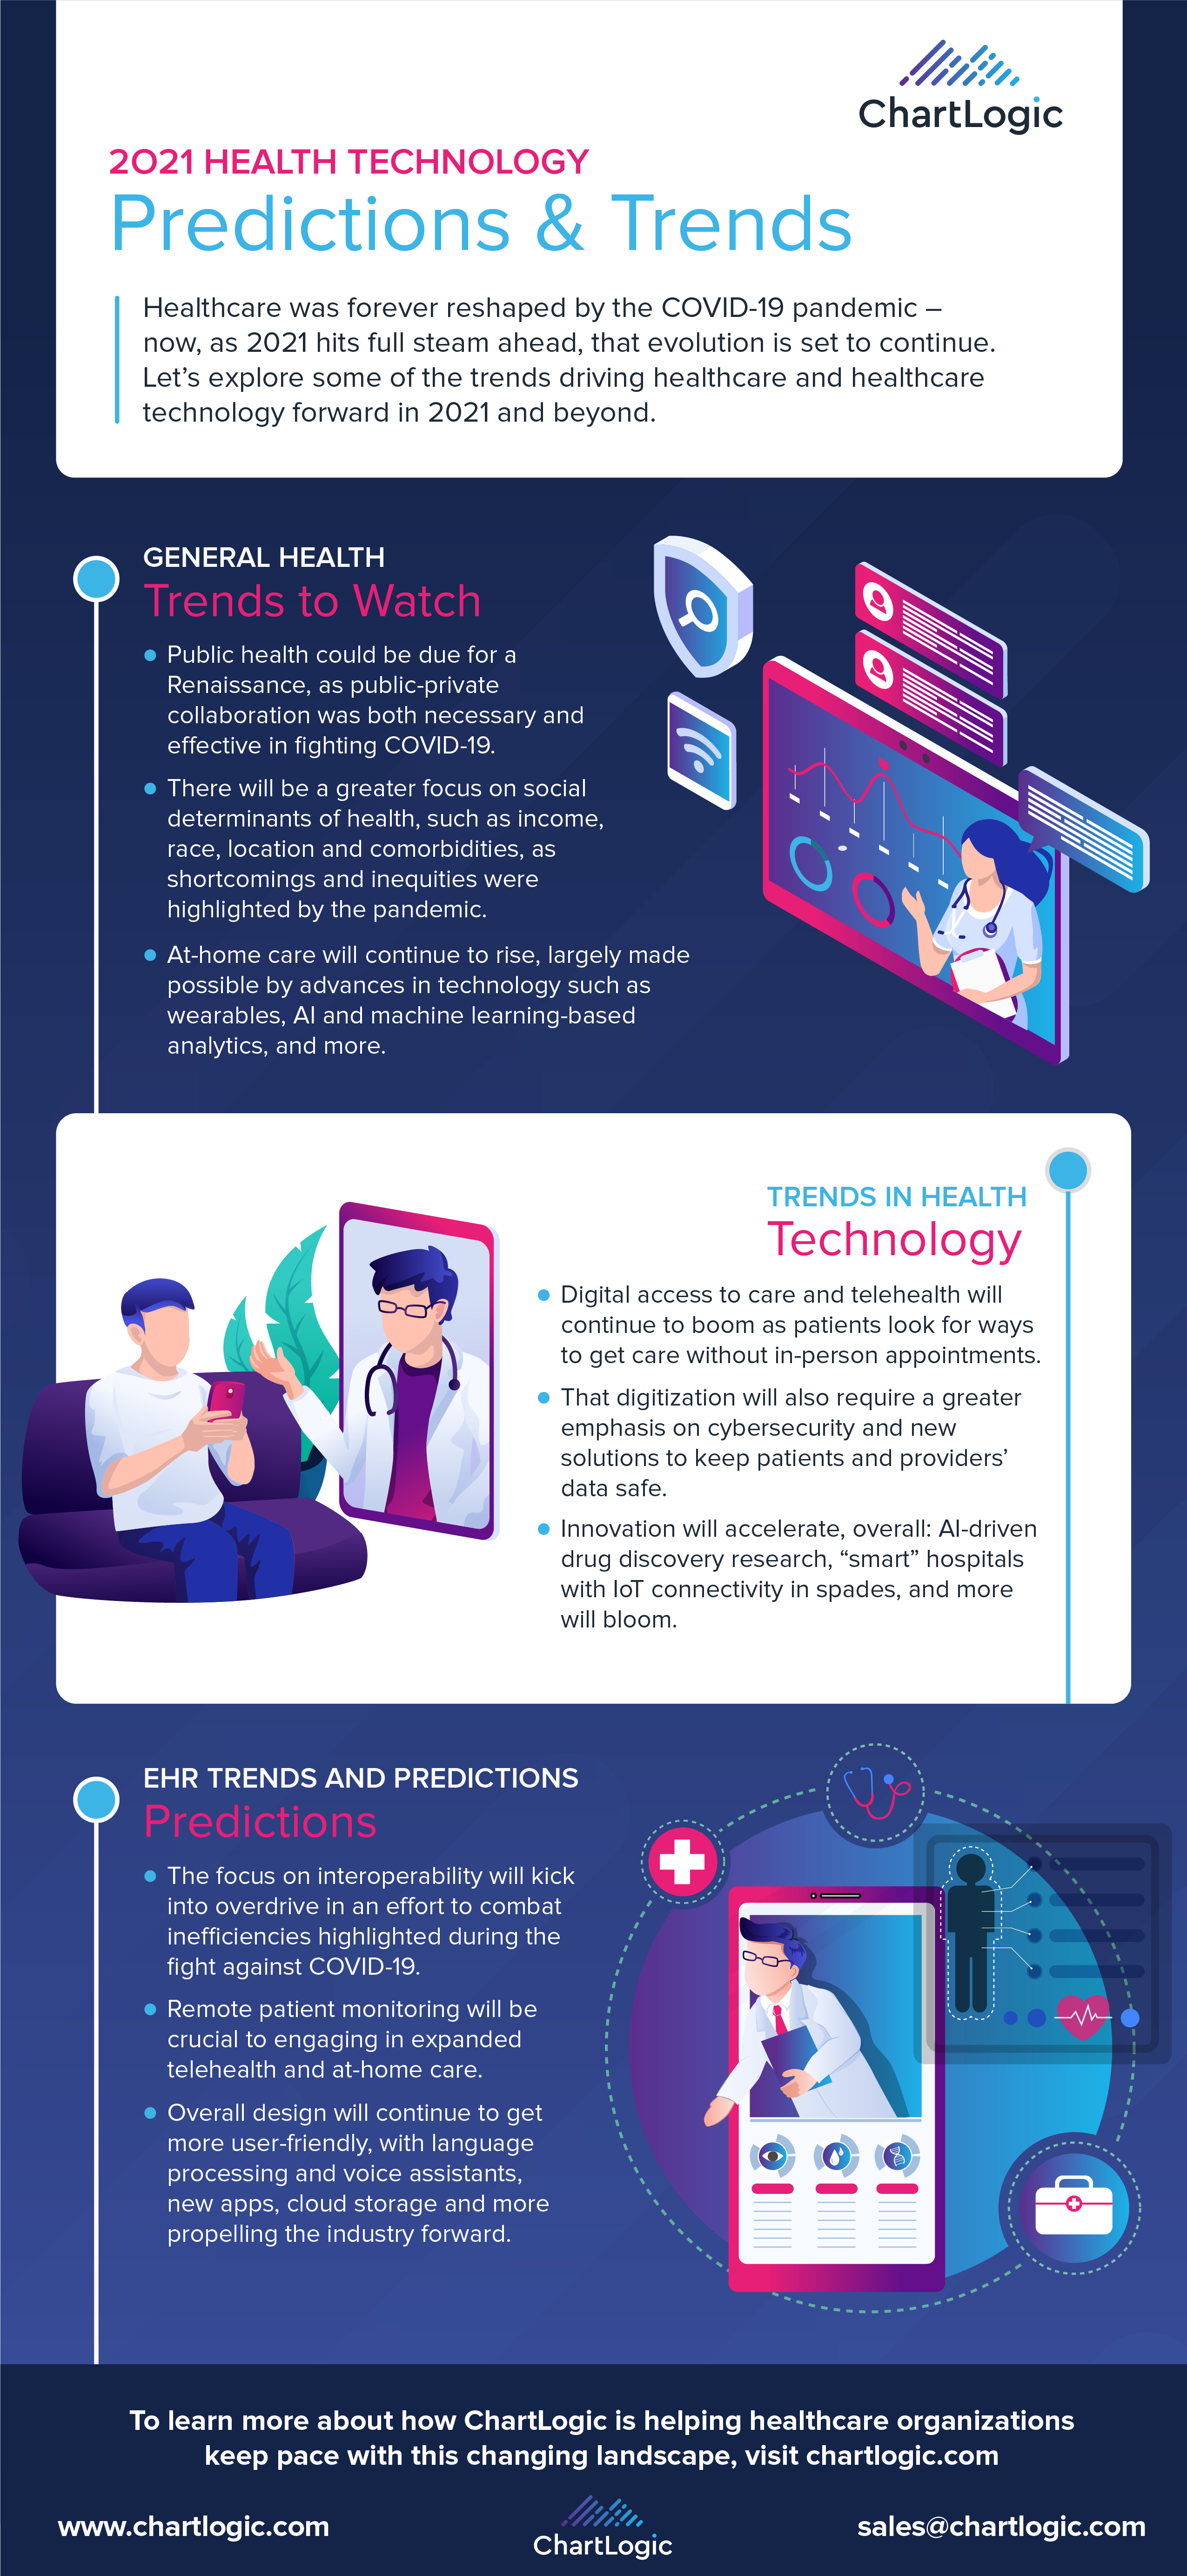 healthcare technology trends, healthcare 2021, healthcare predictions